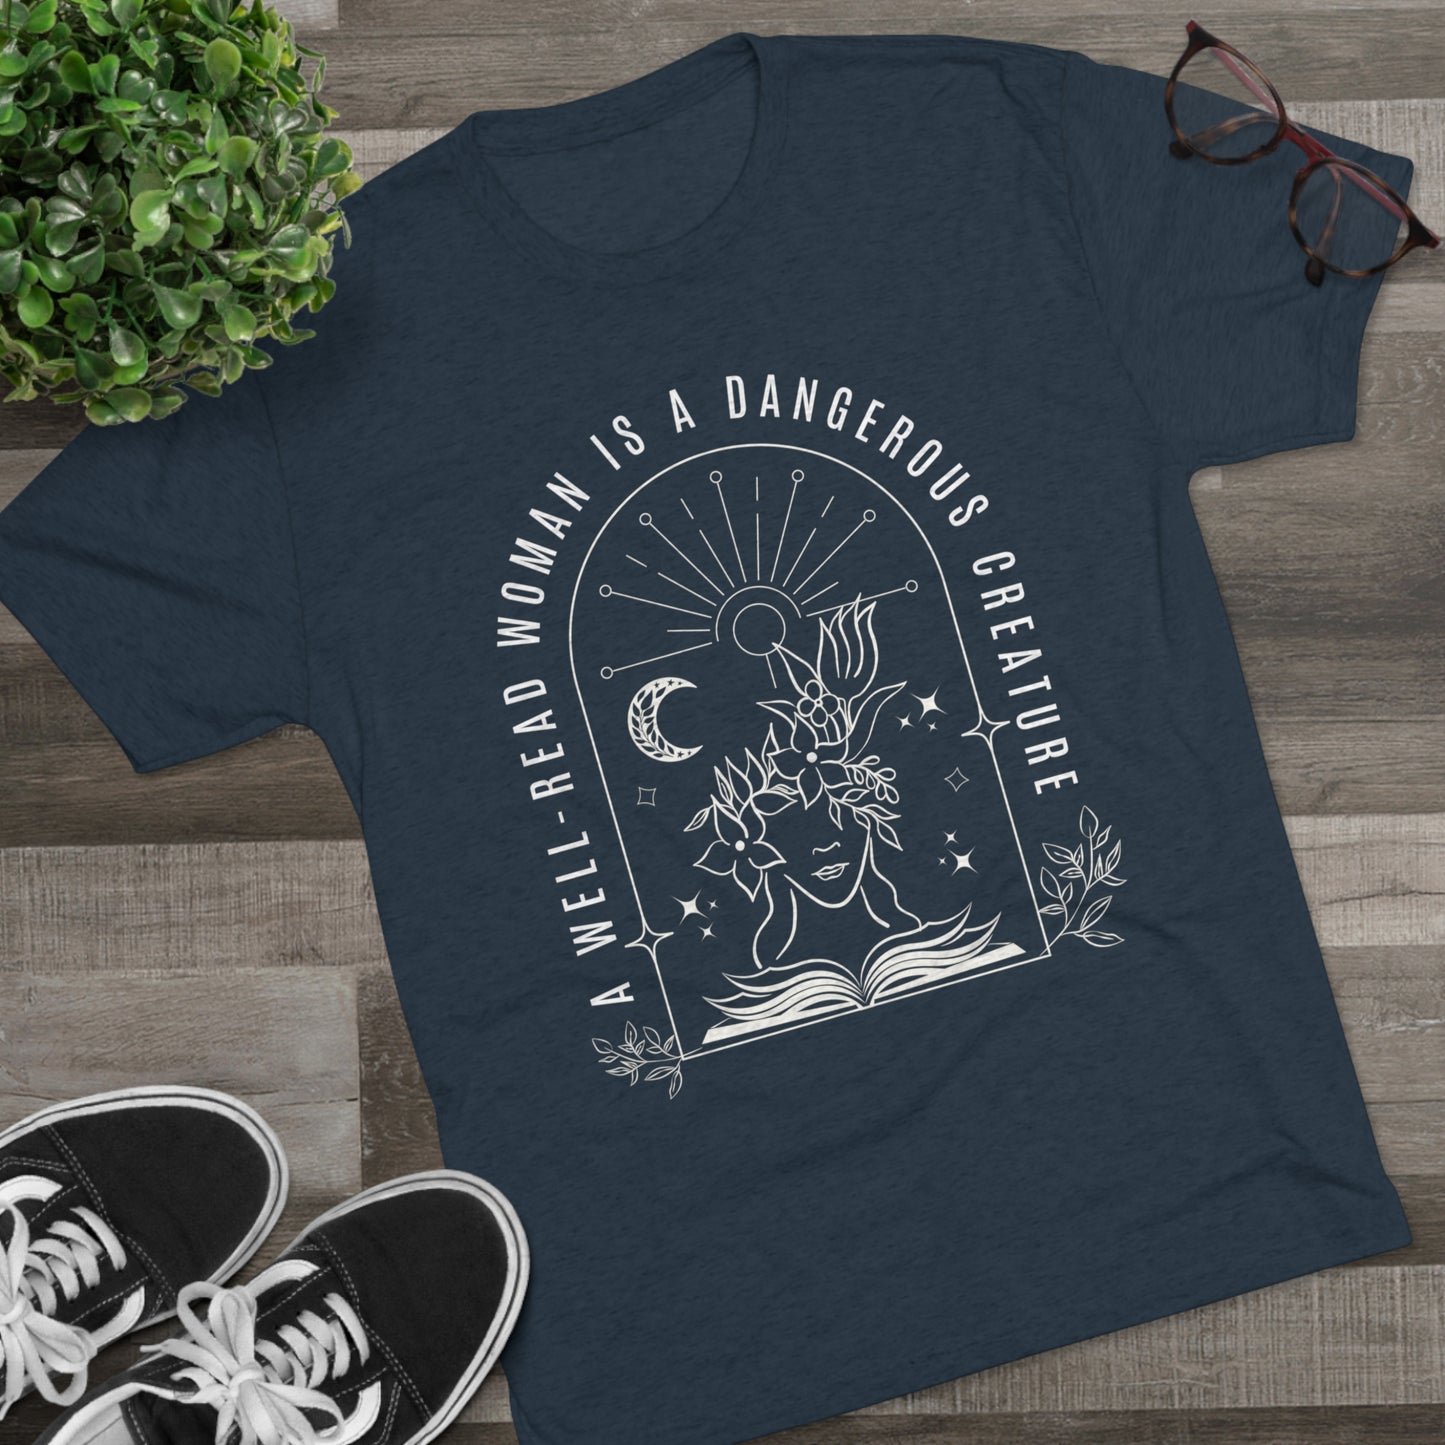 A Well-Read Woman is a Dangerous Creature Tri-Blend Crew Tee